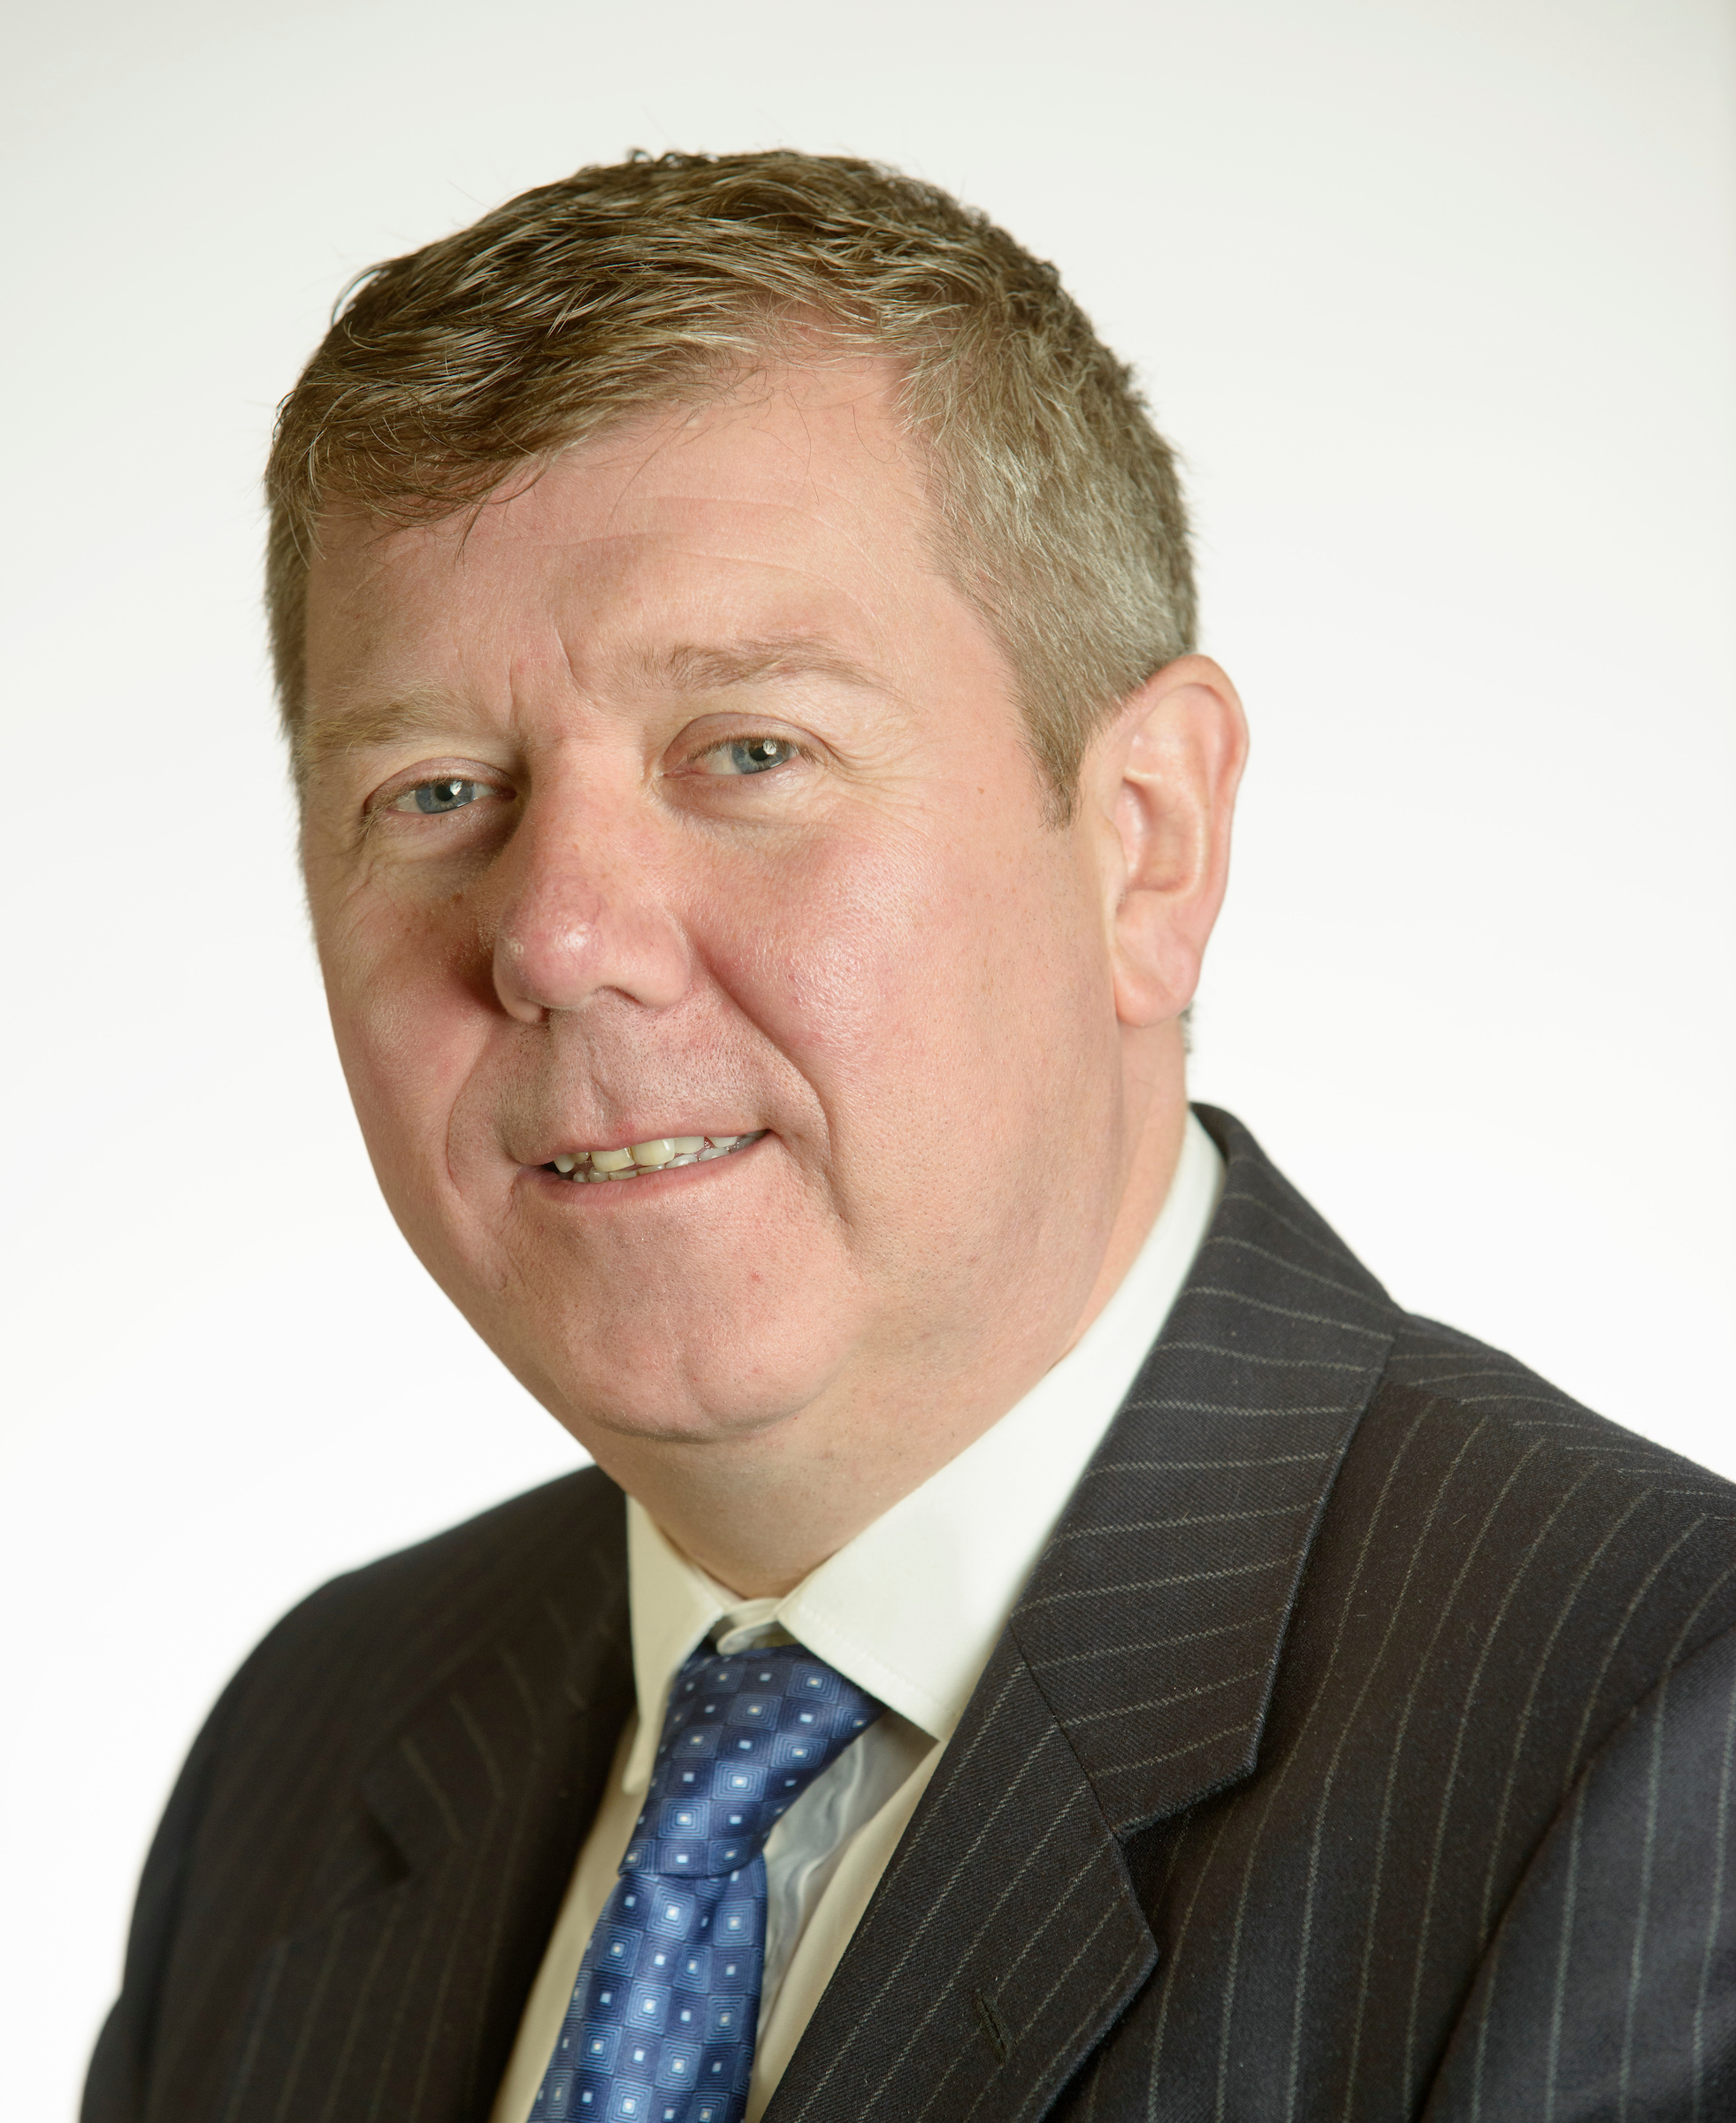 Harper Macleod briefs solicitors on operation of new First Home Fund